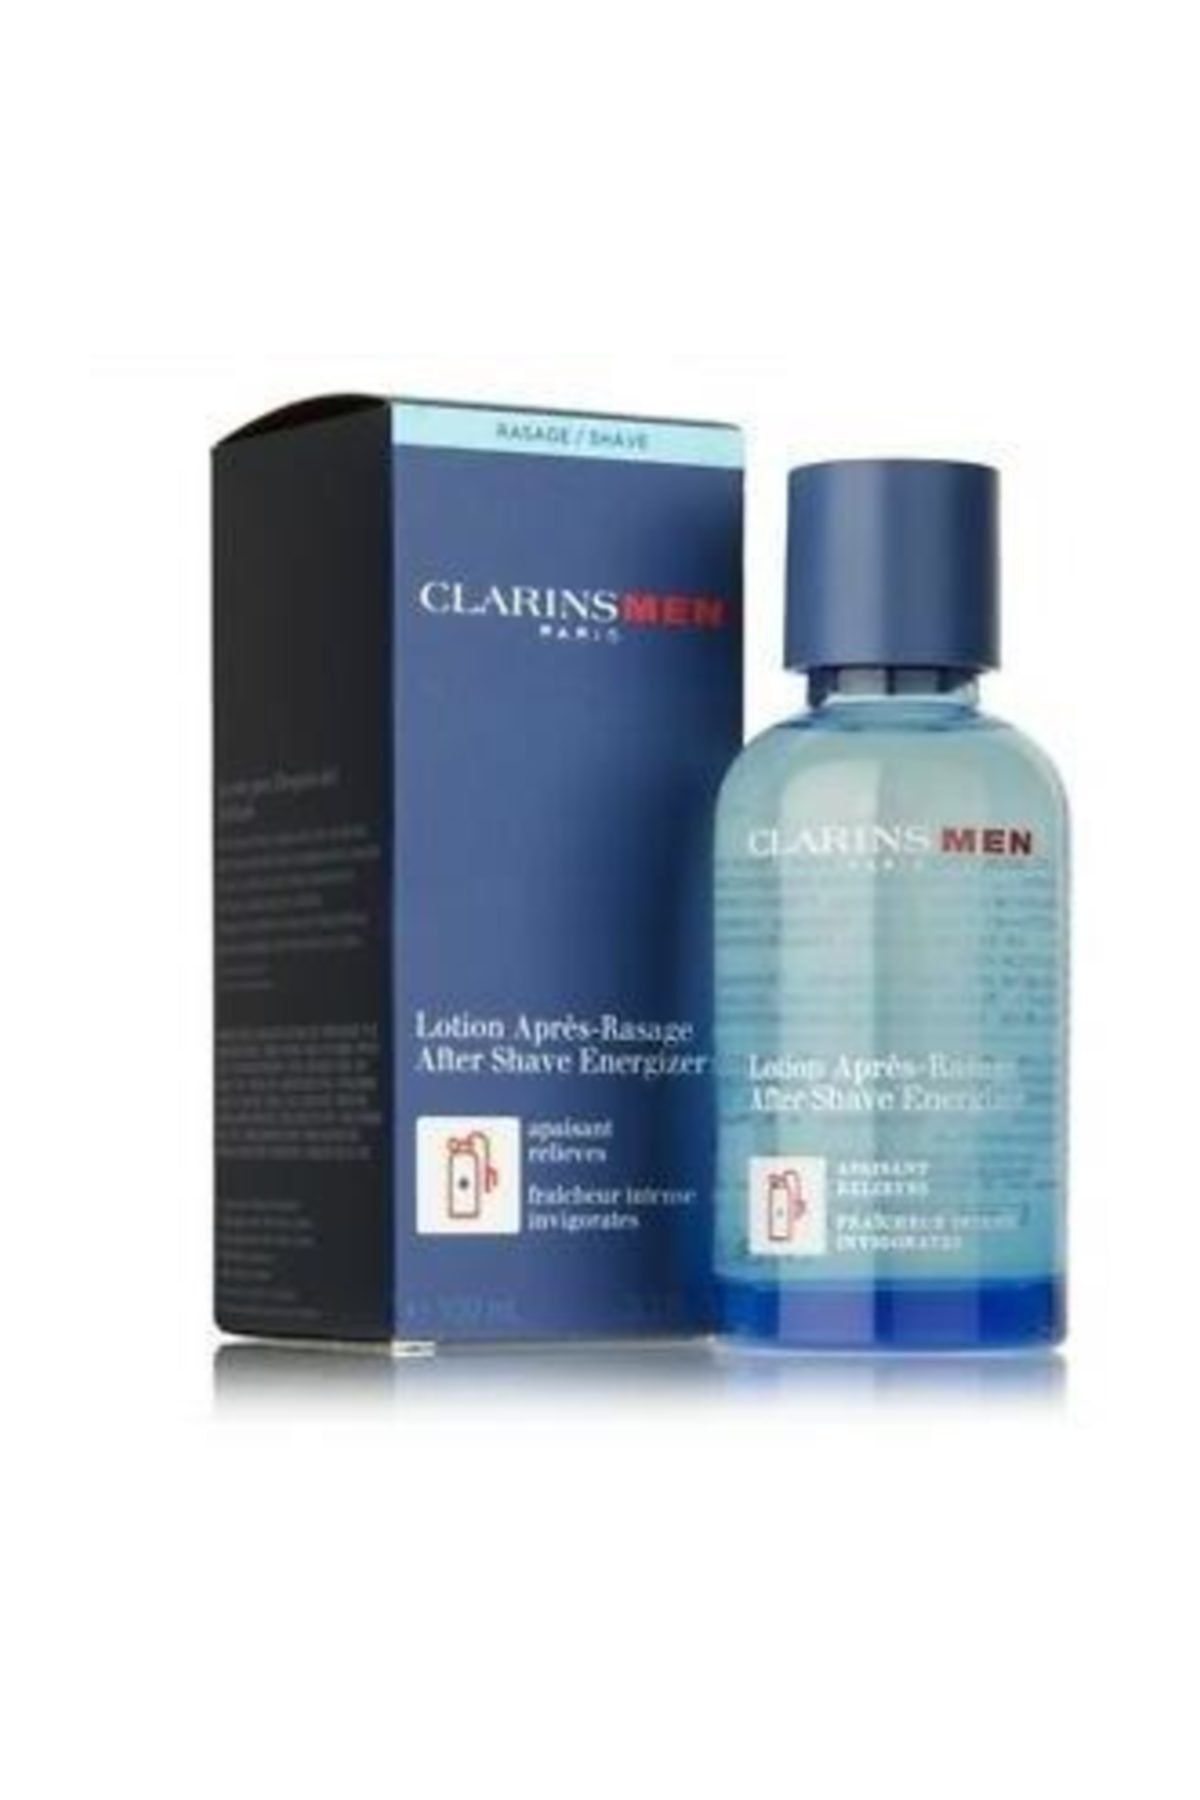 Clarins Men After Shave Energizer 100ml. New Box